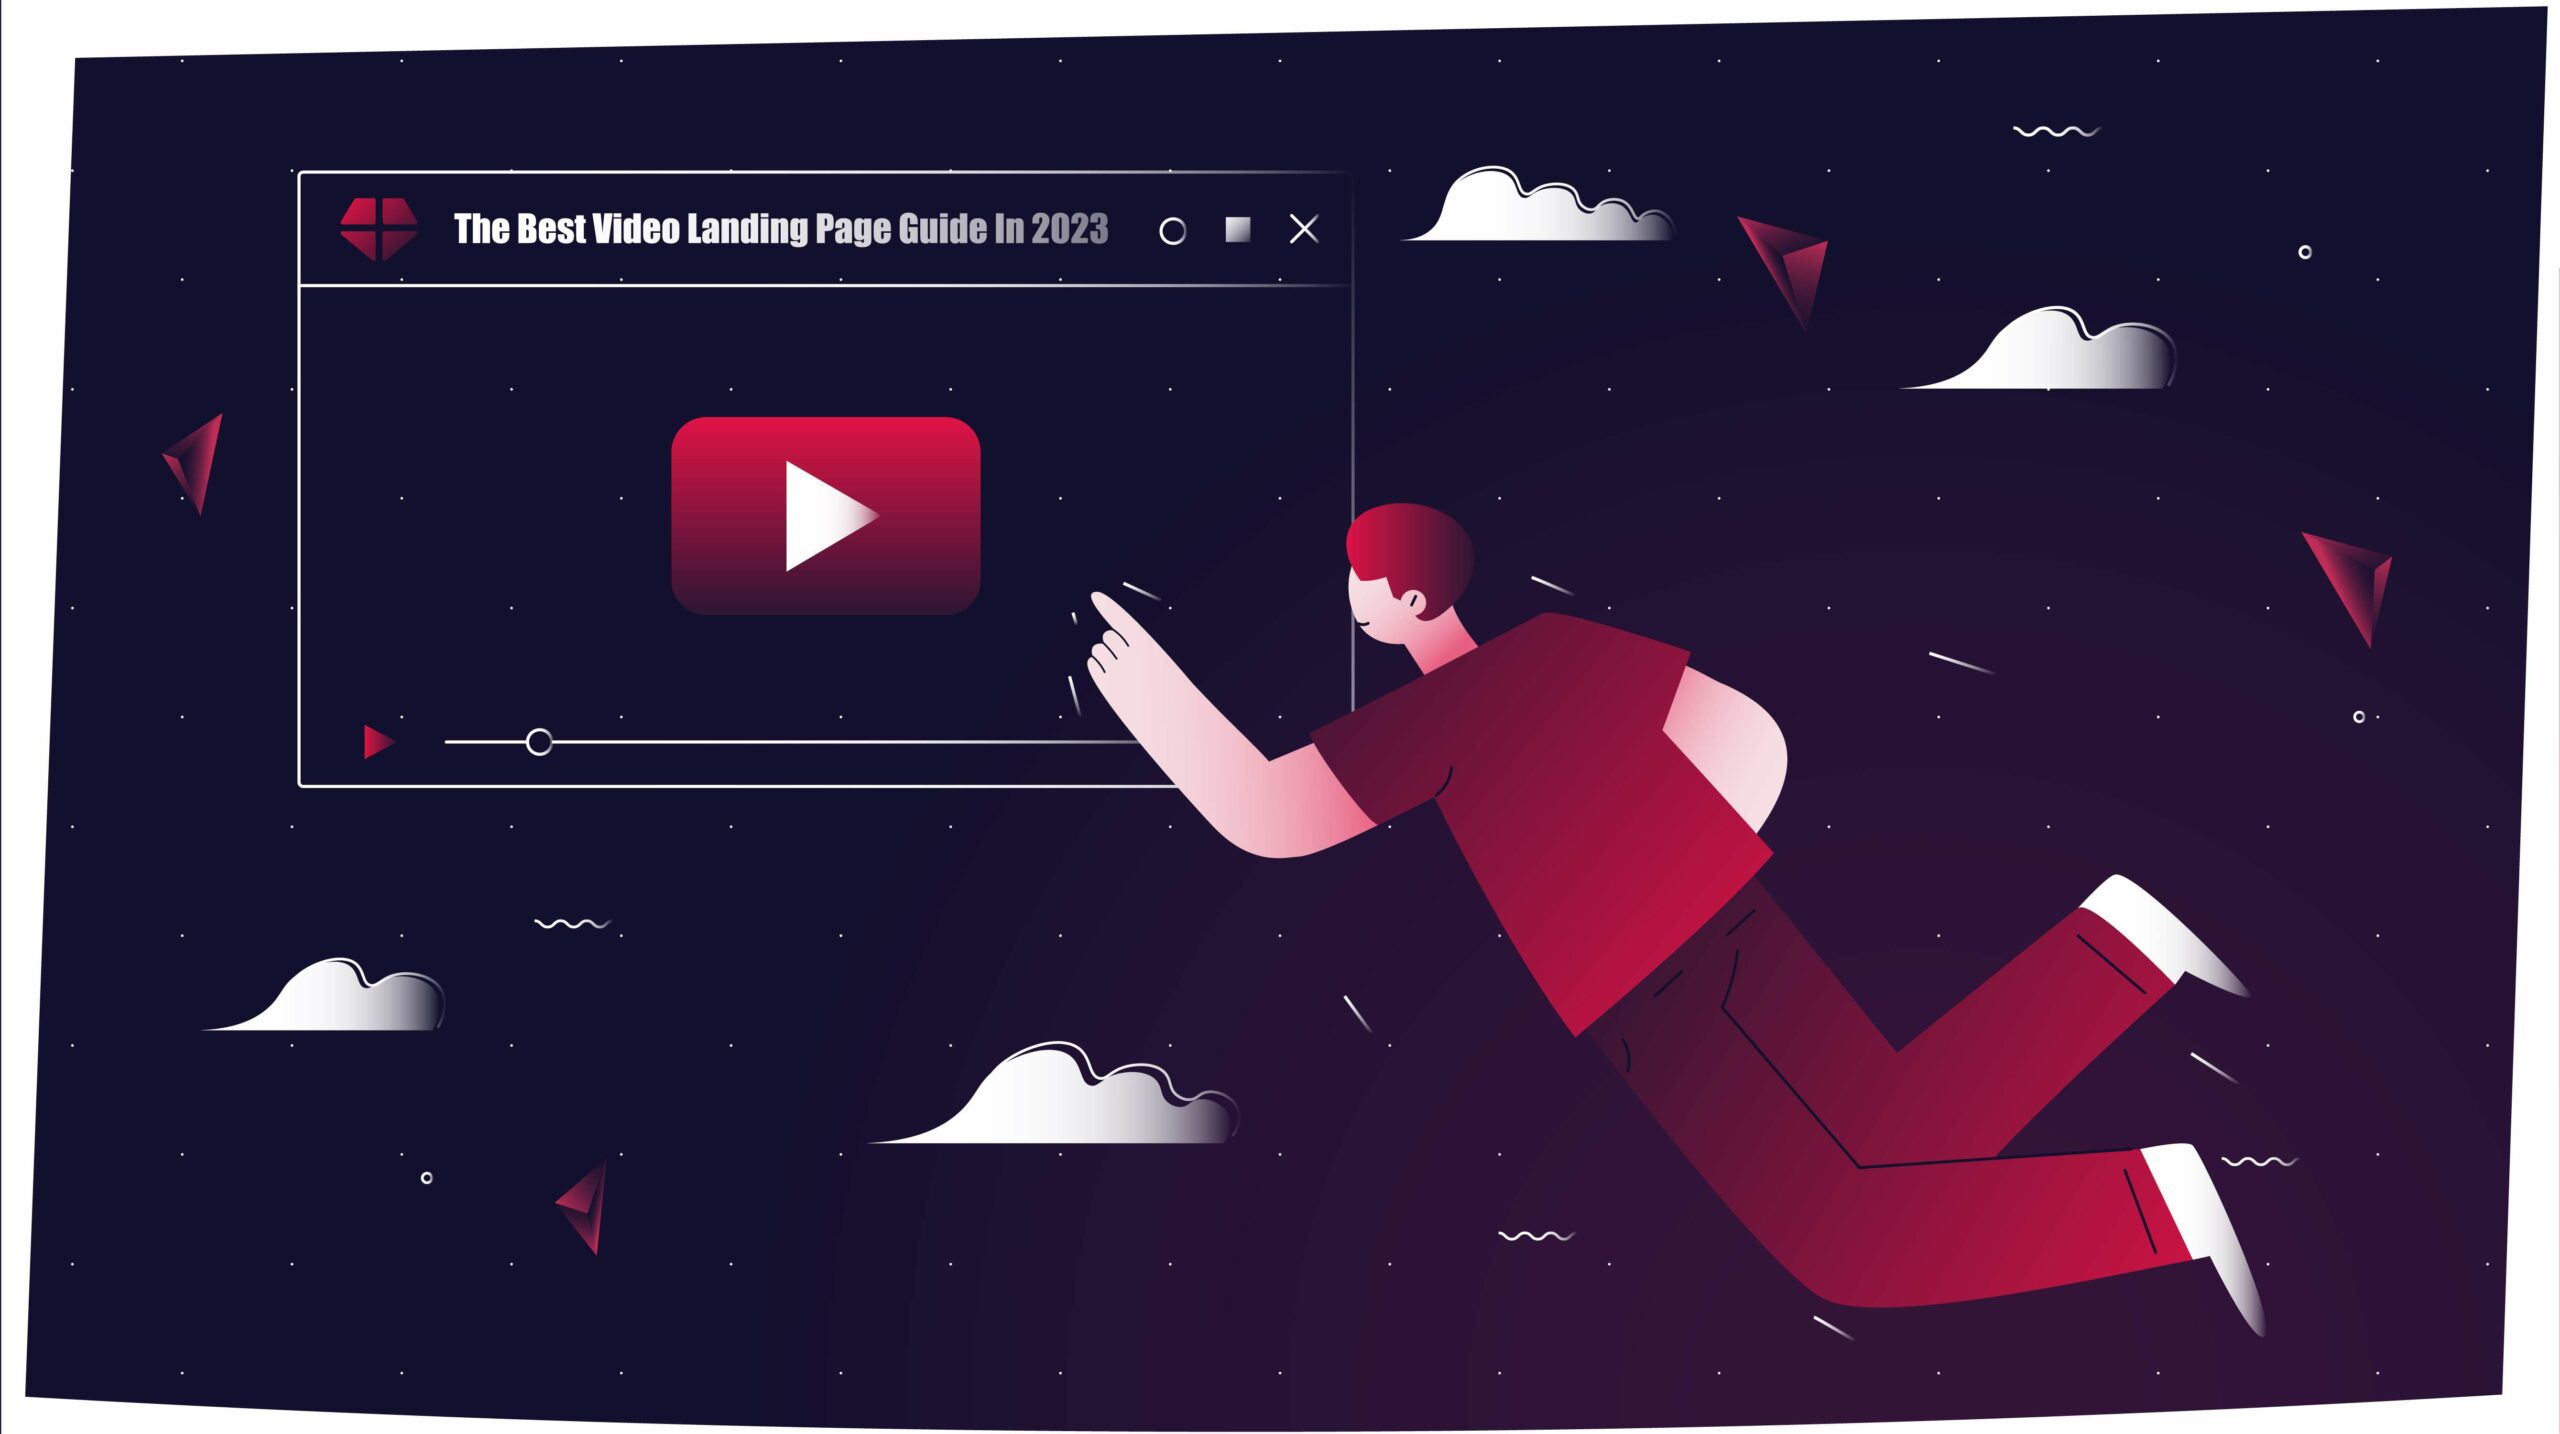 The Best Video Landing Page Guide In 2023